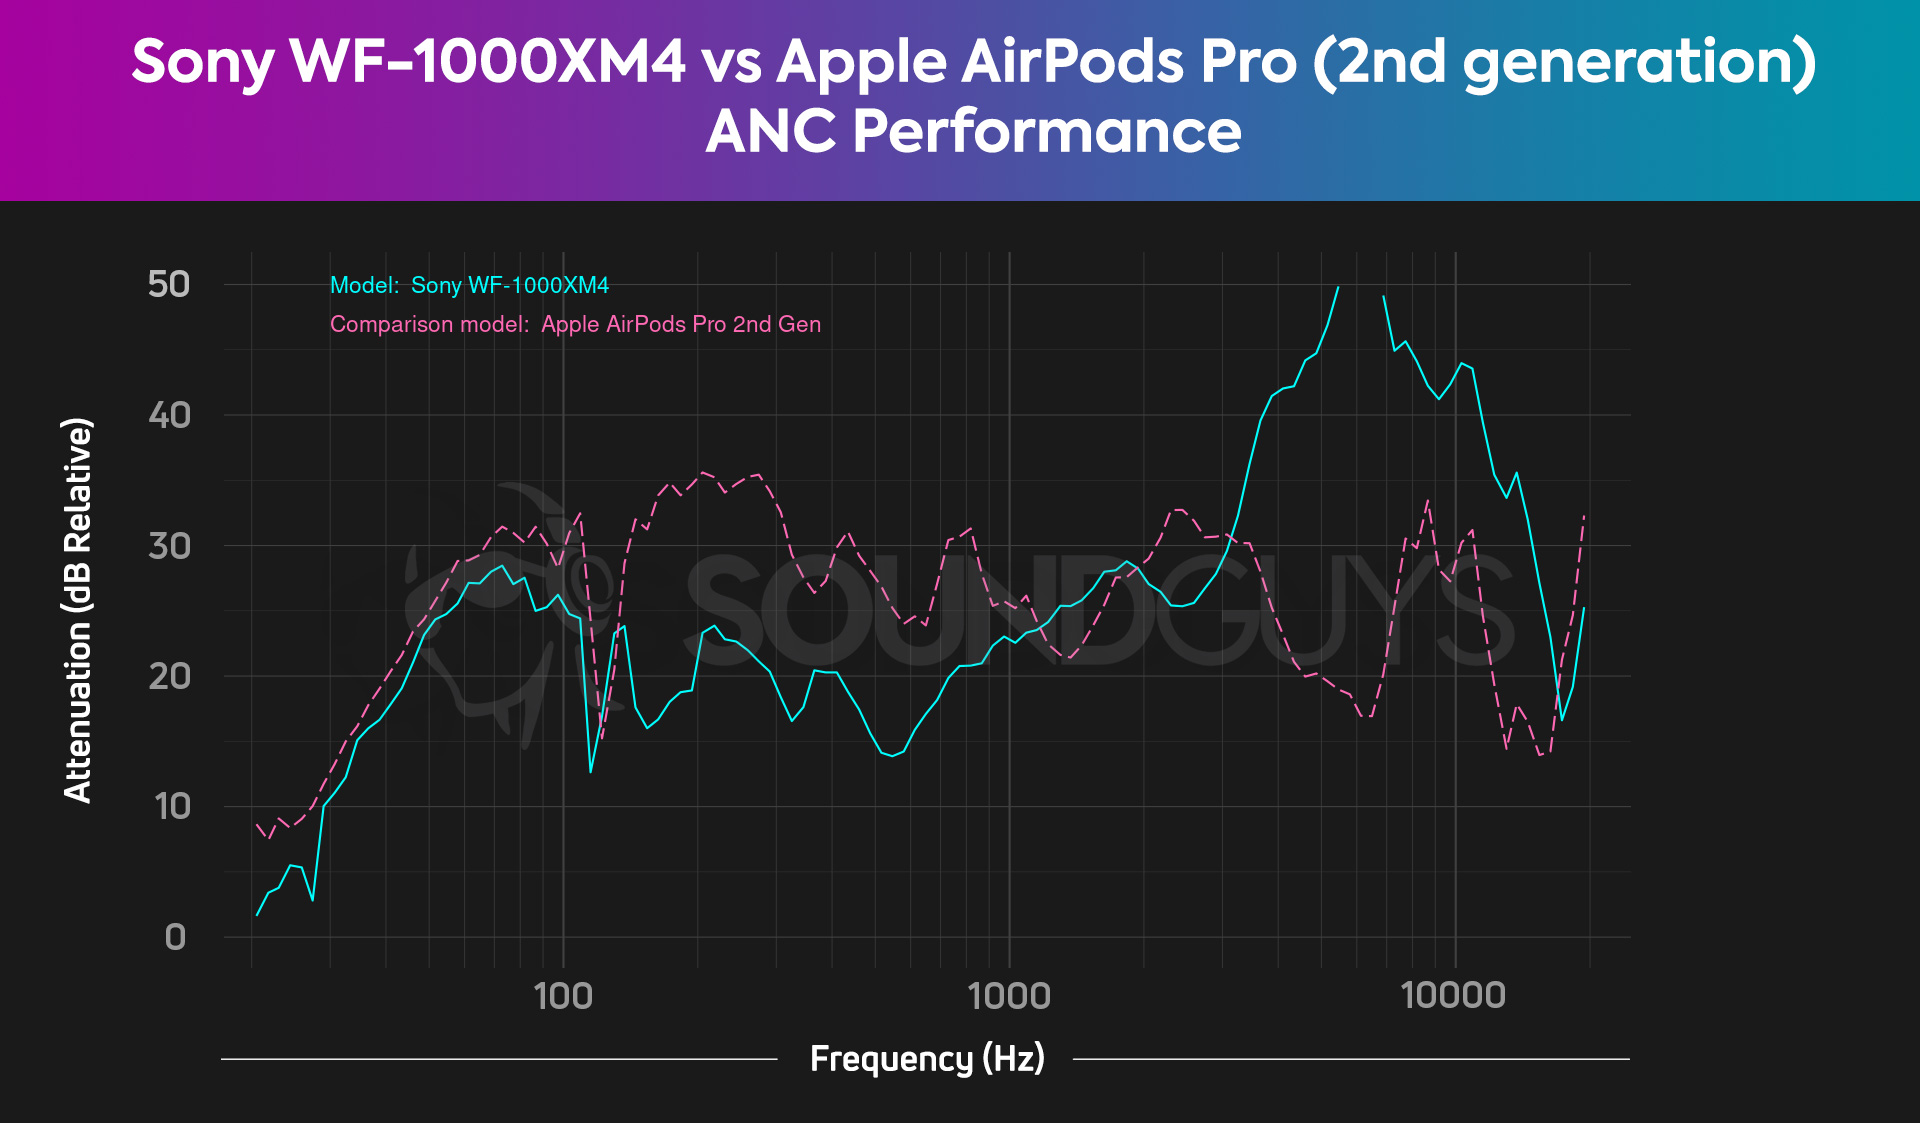 Sony WF 1000XM4 vs Apple AirPods Pro 2nd generation noise cancelling attenuation comparison chart